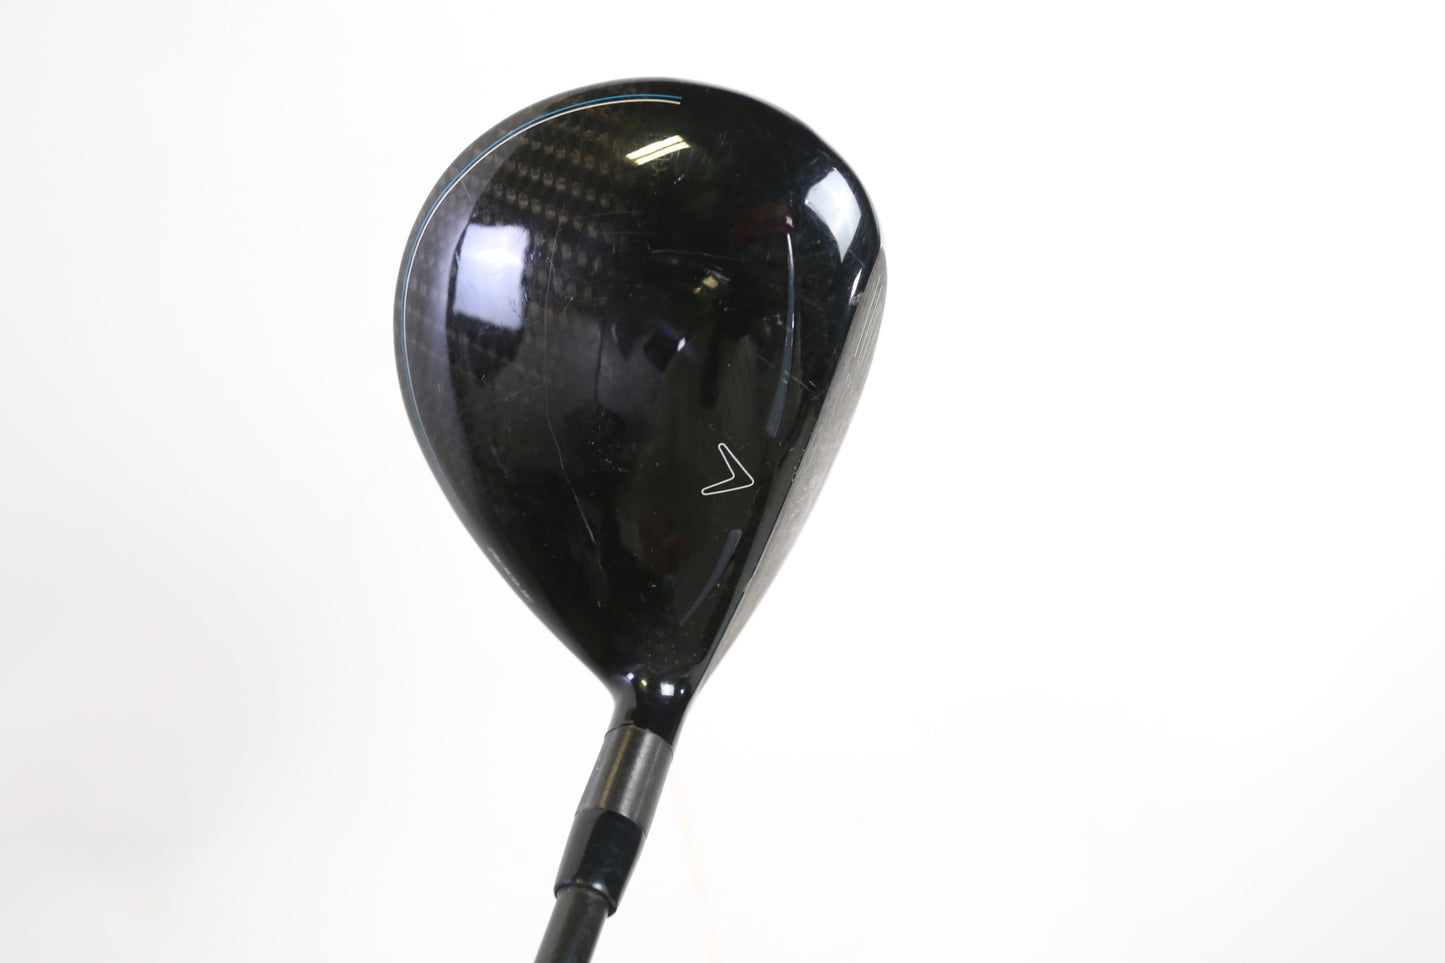 Used Callaway Rogue 3-Wood - Left-Handed - 15 Degrees - Regular Flex-Next Round